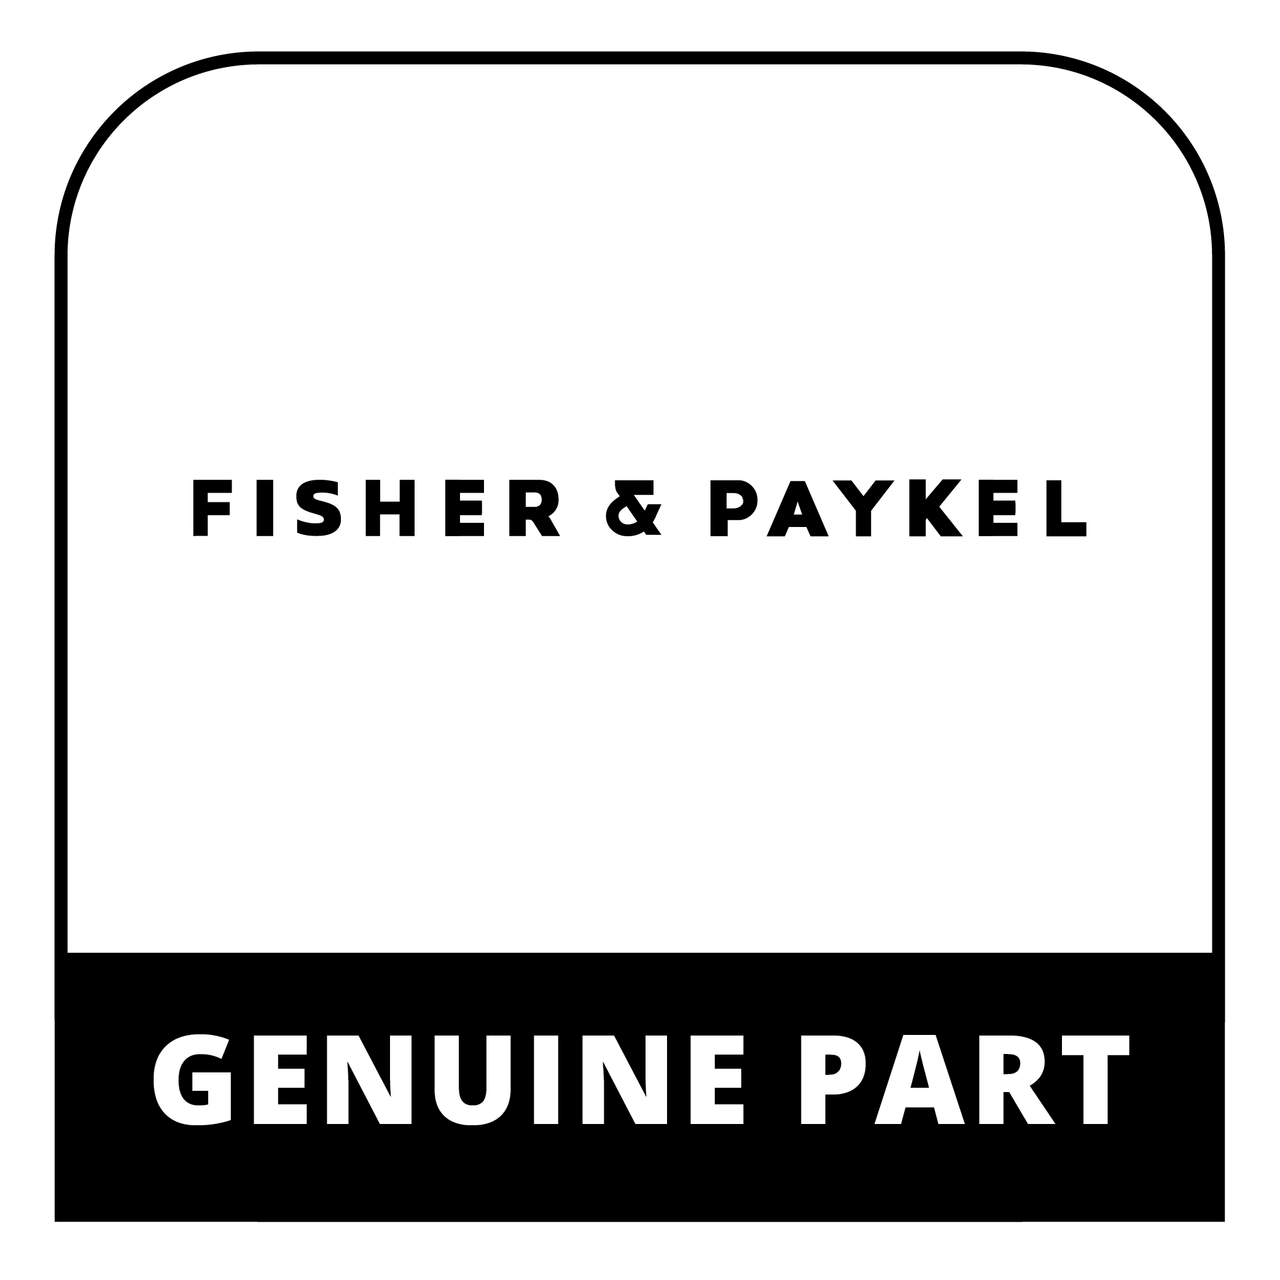 Fisher & Paykel 290325 - Kit Fuse 5X20 T1A 250Vst522220 - Genuine Fisher & Paykel (DCS) Part